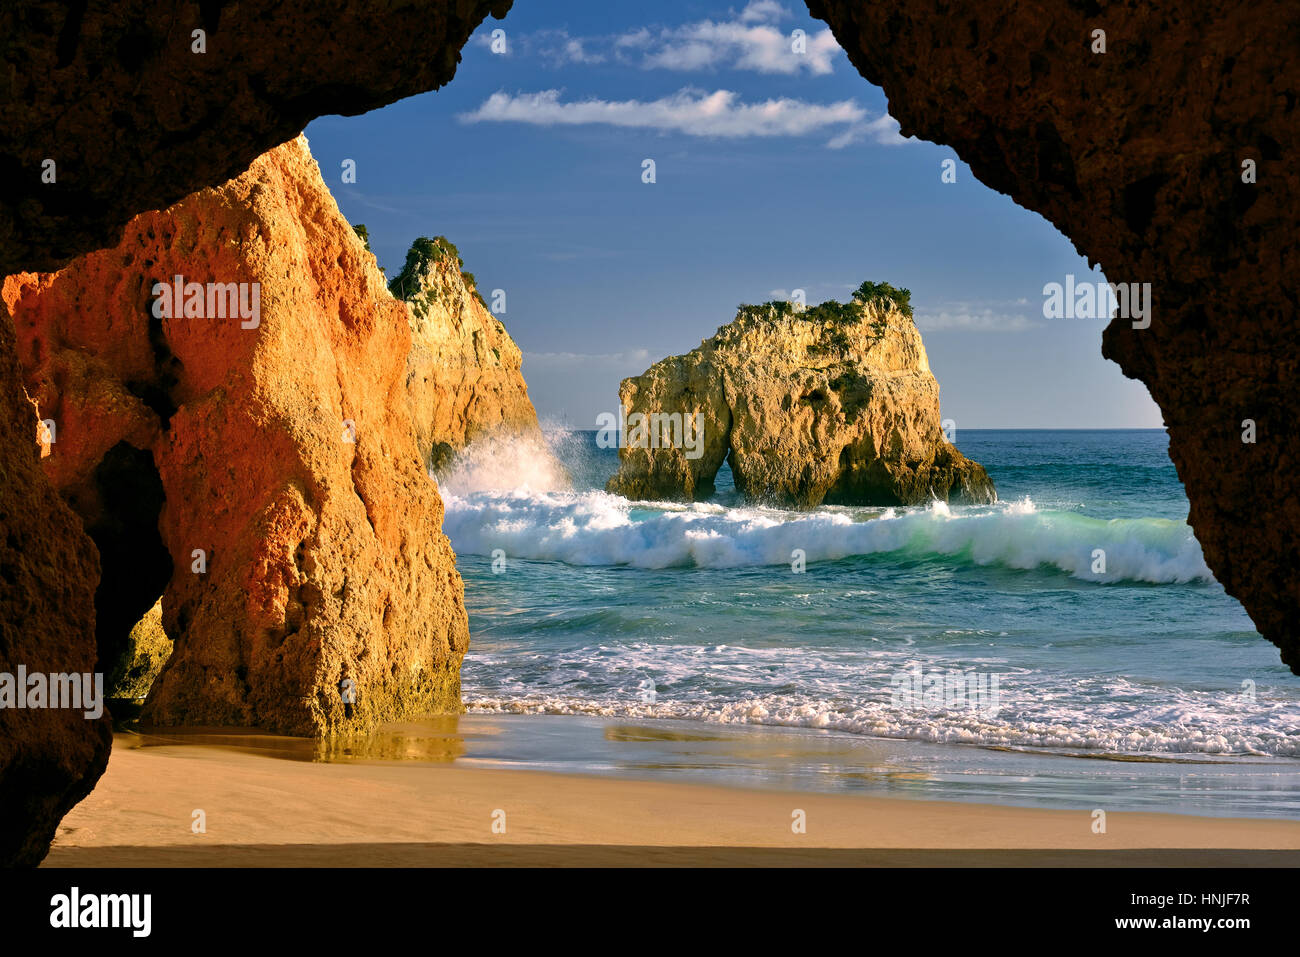 Portugal: View through a cave to rocky beach wand waves Stock Photo